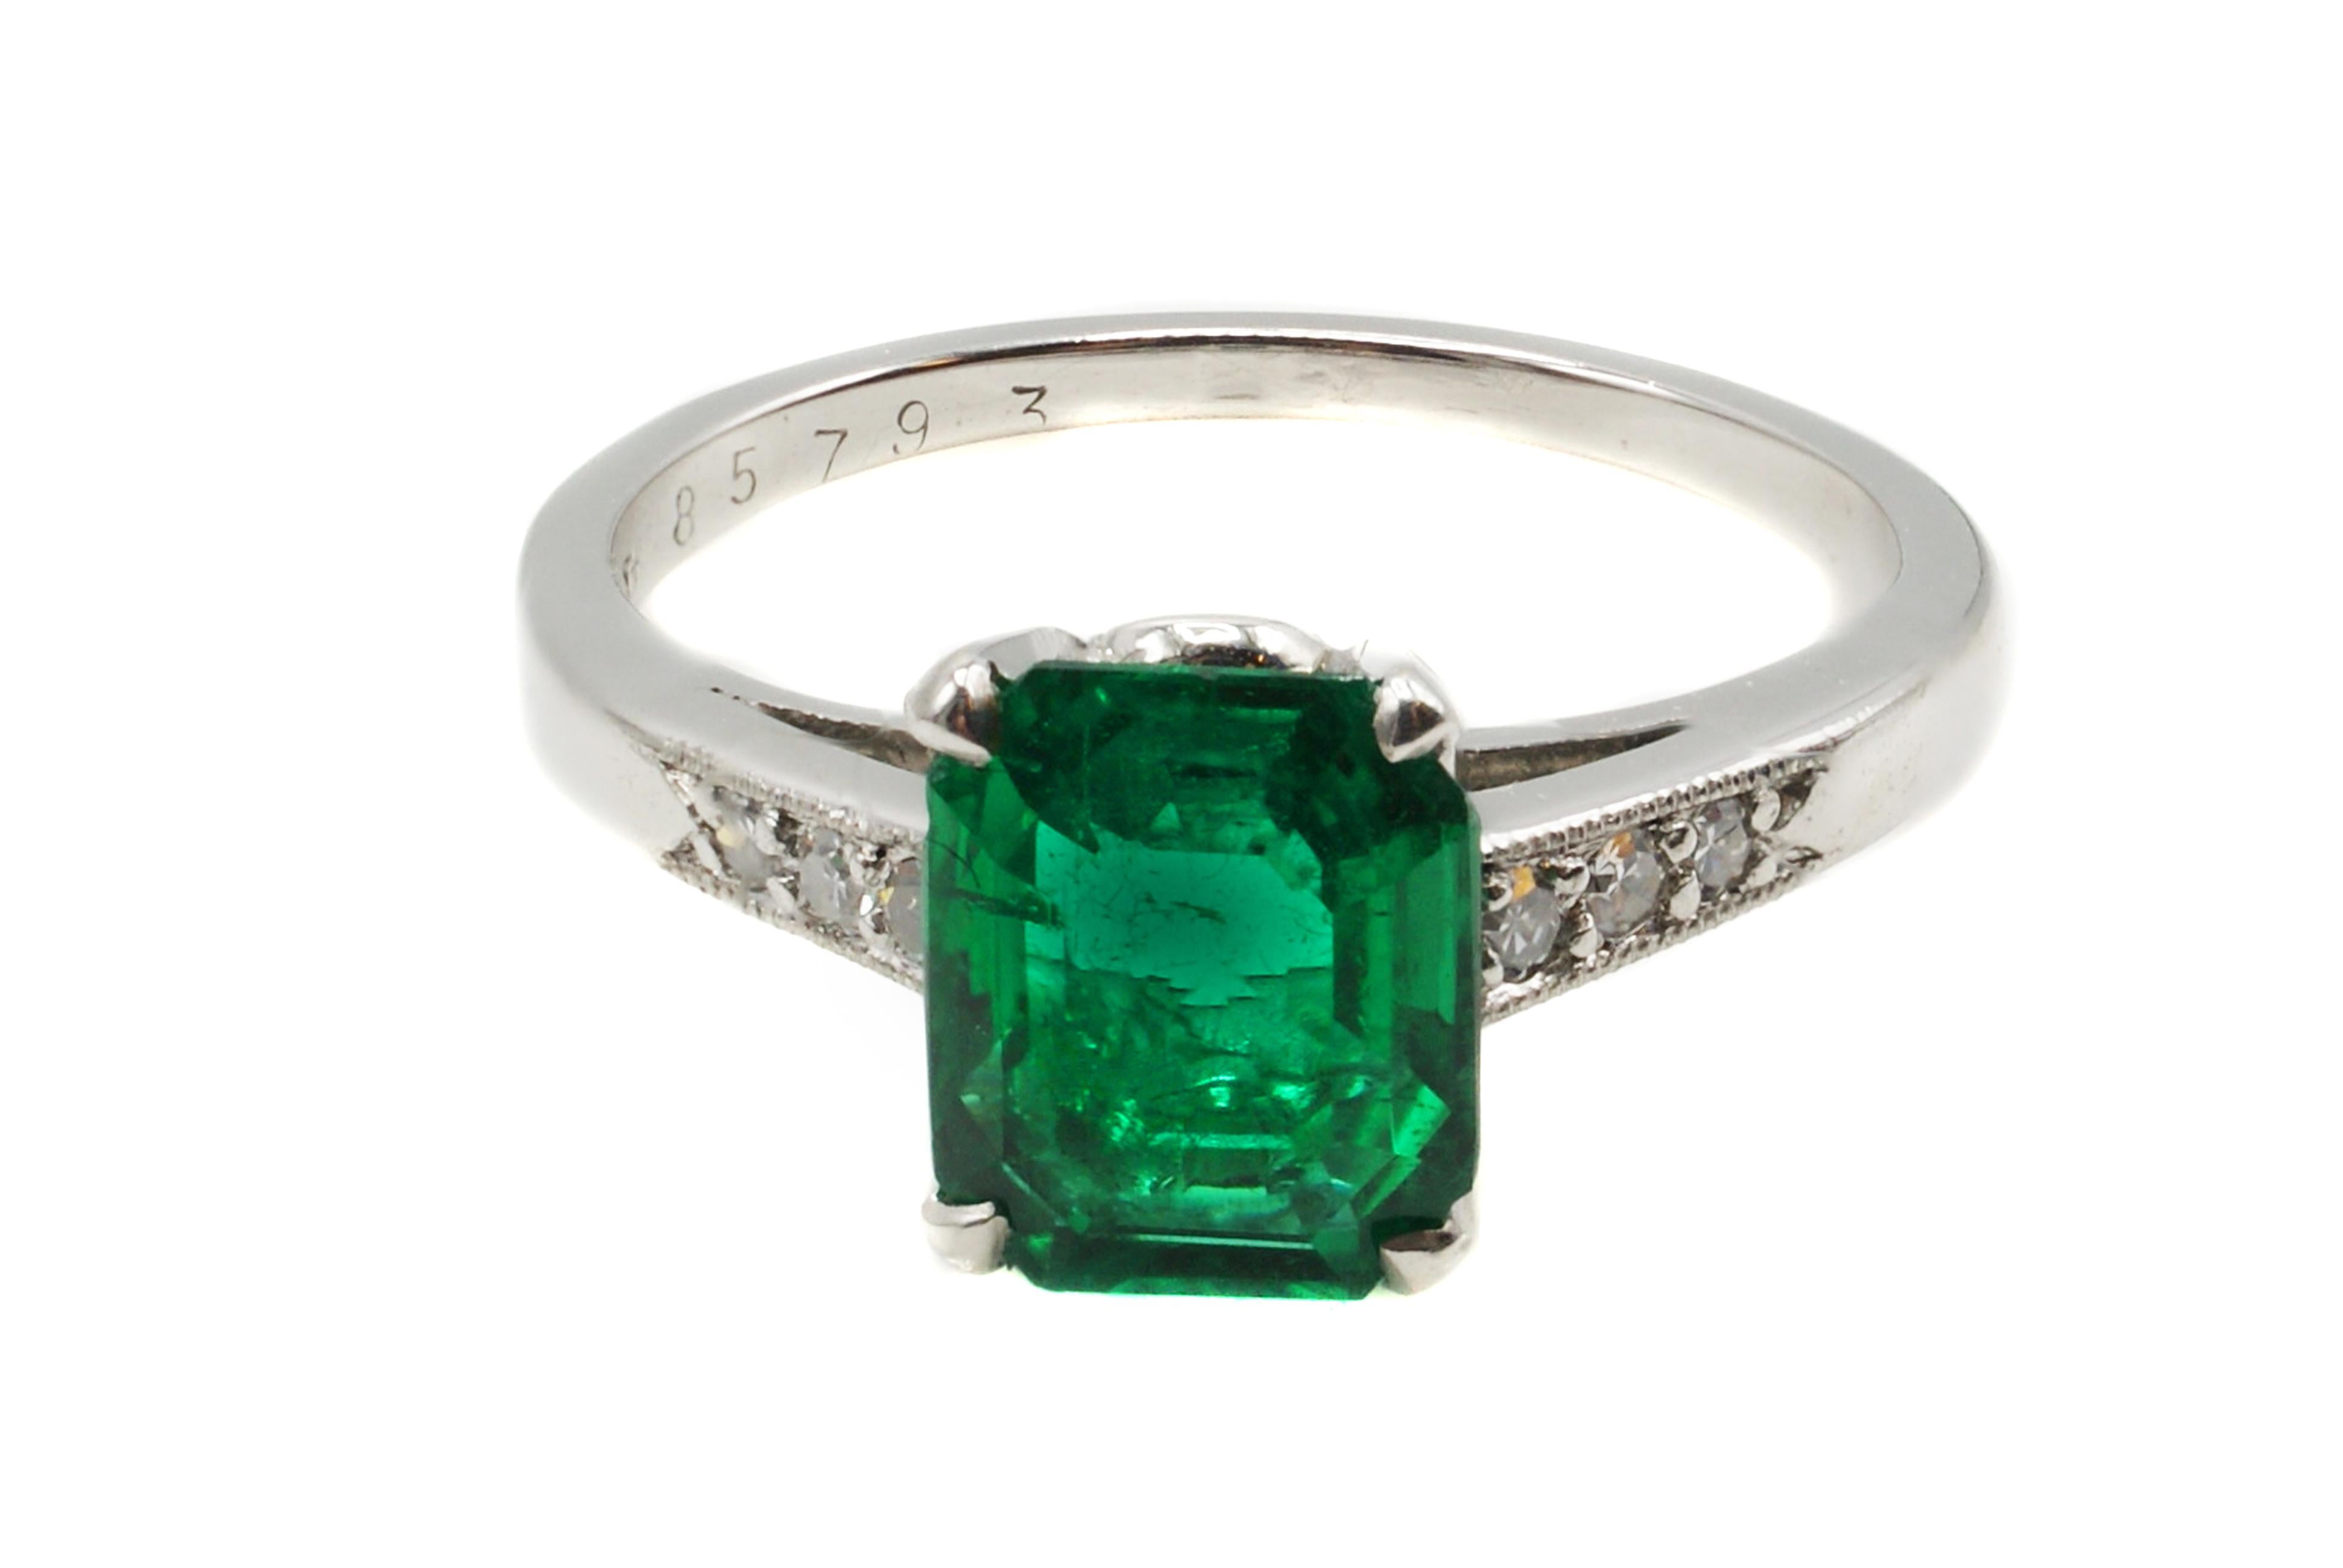 This original Art Deco ring, ca. 1925, by Cartier features a fine Colombian emerald weighing 1.72 carats. The luscious deep forest green emerald perfectly cut as a rectangular step-cut brings an amazing life to this gem. Accompanied by a report from